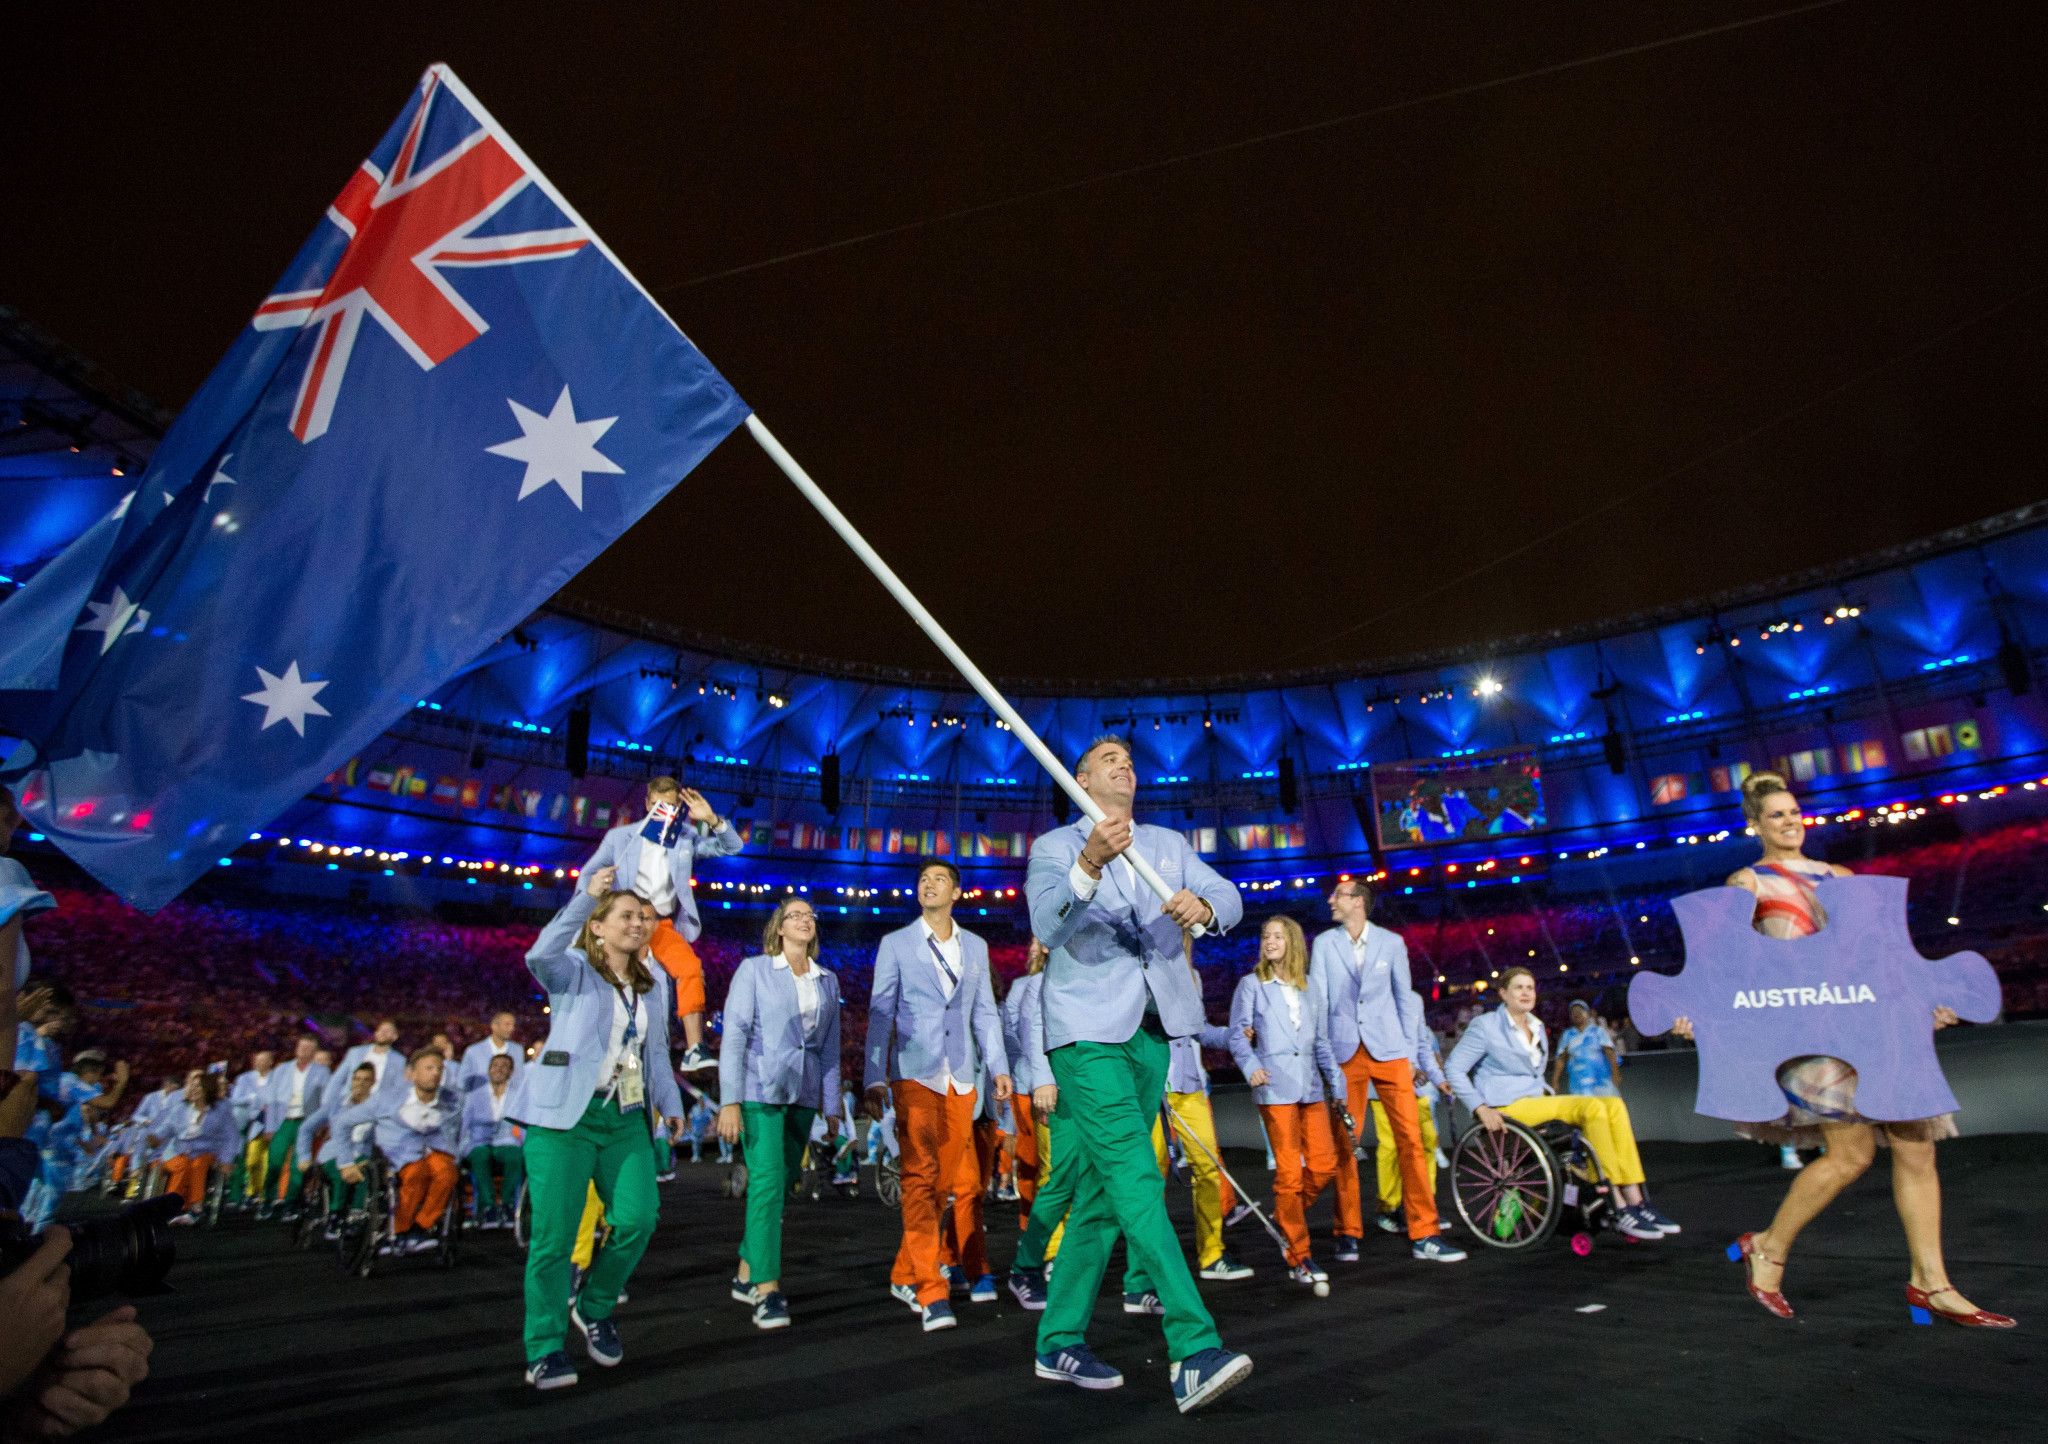 The Federal Police also provided security services to Australian Paralympic athletes at London 2012, Sochi 2014 and Rio 2016 ©Getty Images